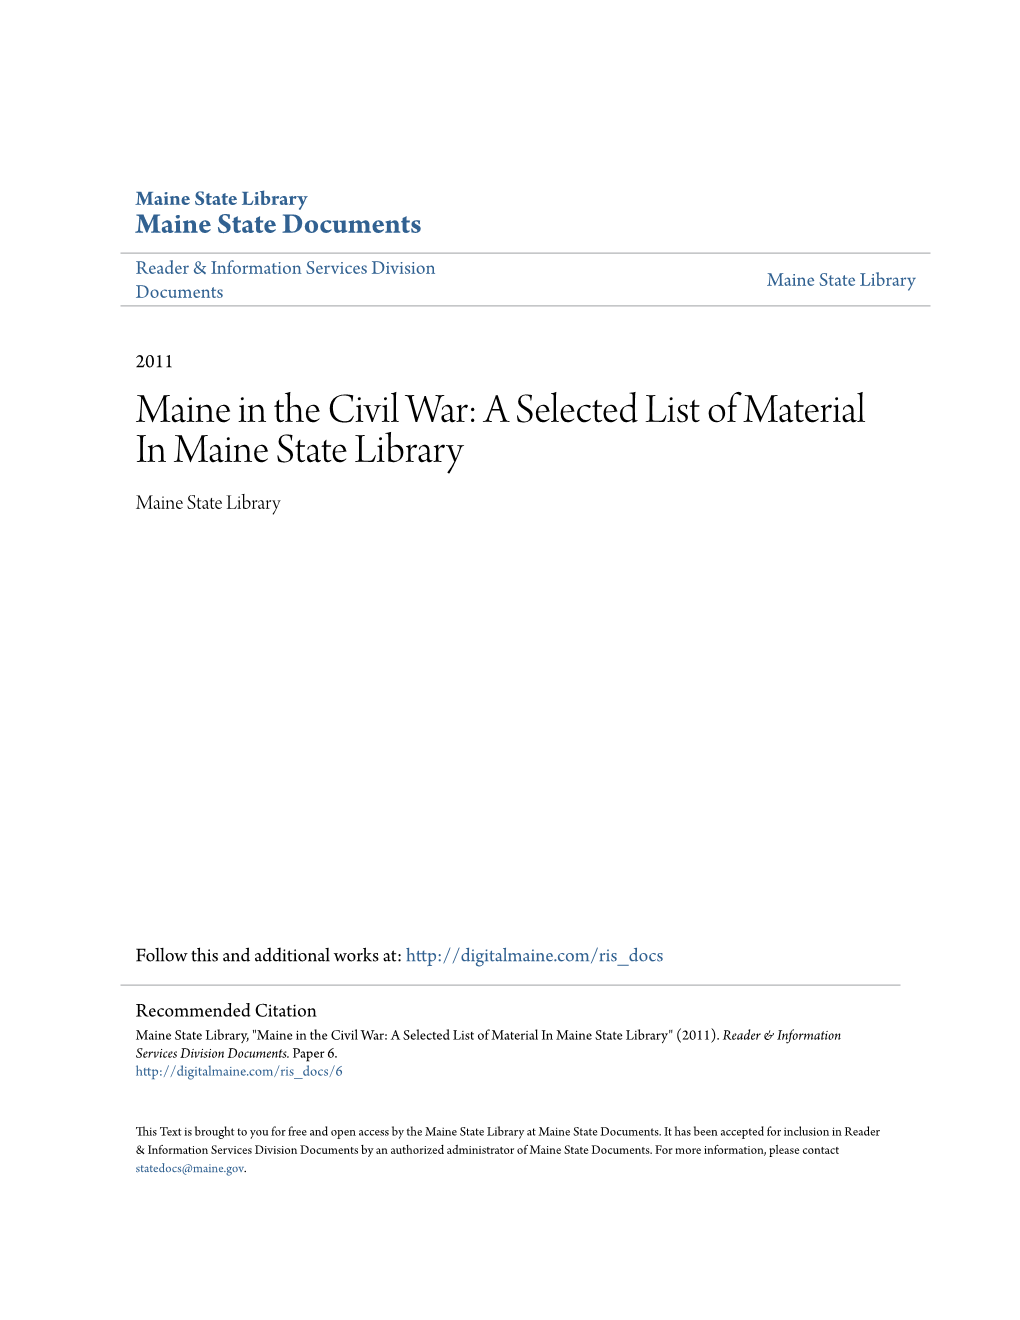 Maine in the Civil War: a Selected List of Material in Maine State Library Maine State Library